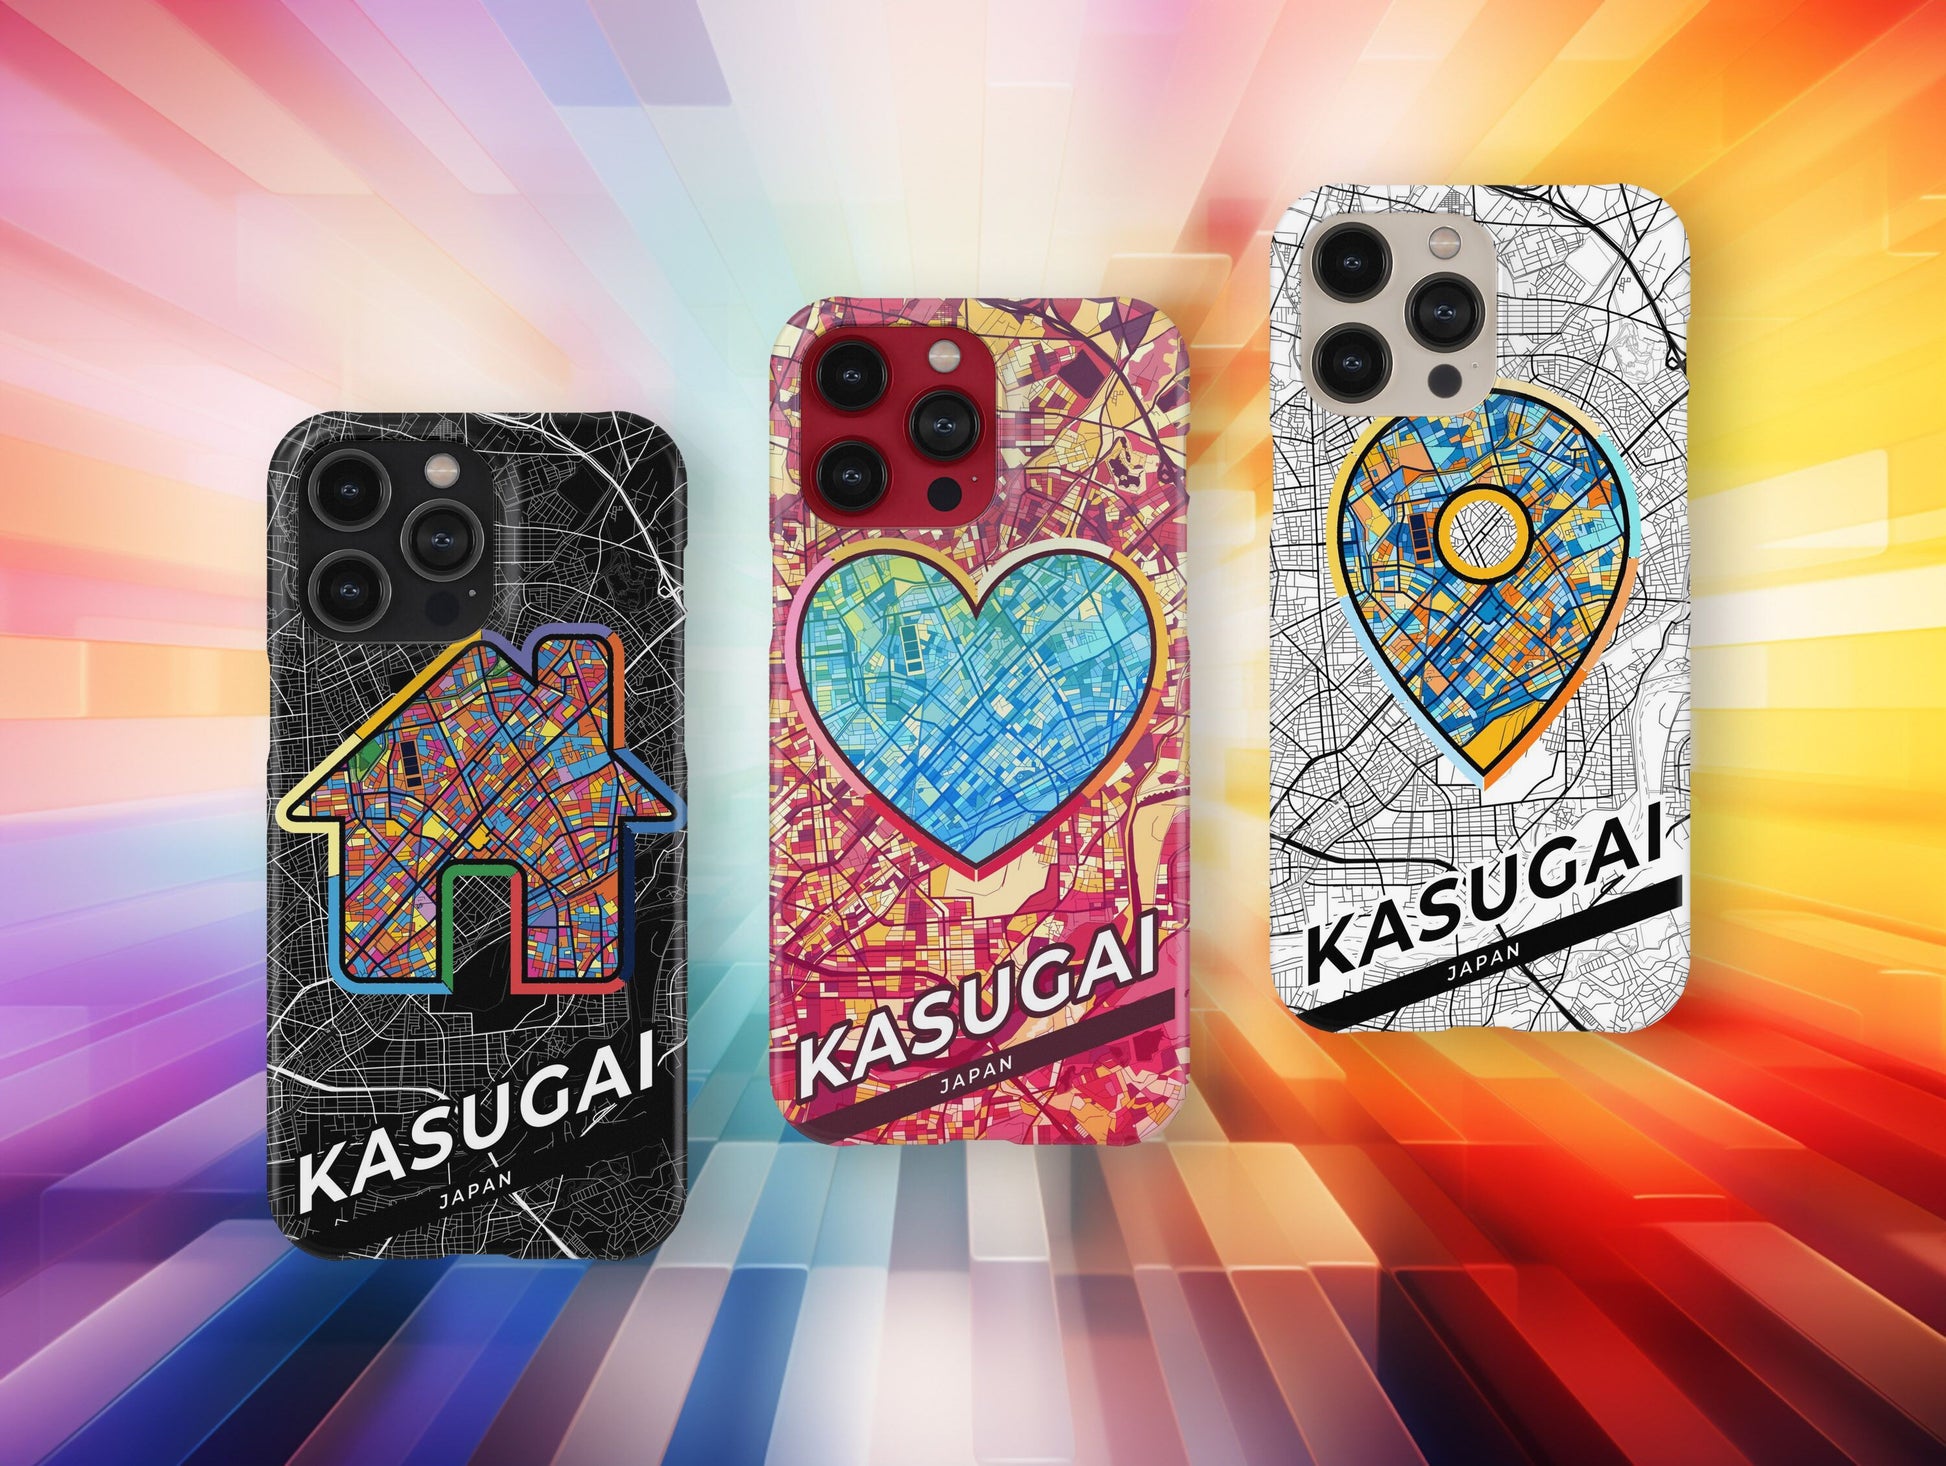 Kasugai Japan slim phone case with colorful icon. Birthday, wedding or housewarming gift. Couple match cases.